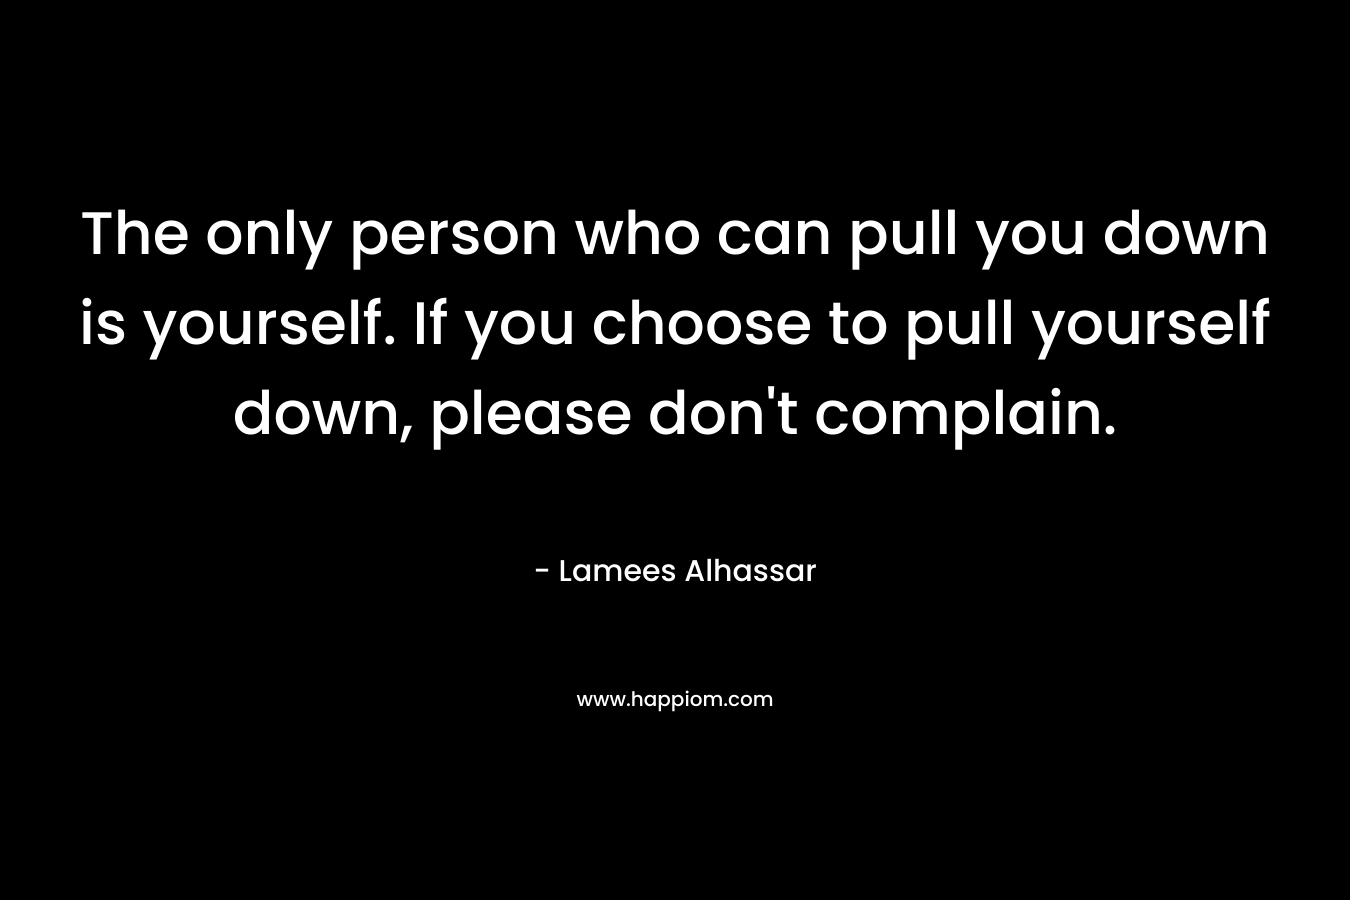 The only person who can pull you down is yourself. If you choose to pull yourself down, please don't complain.